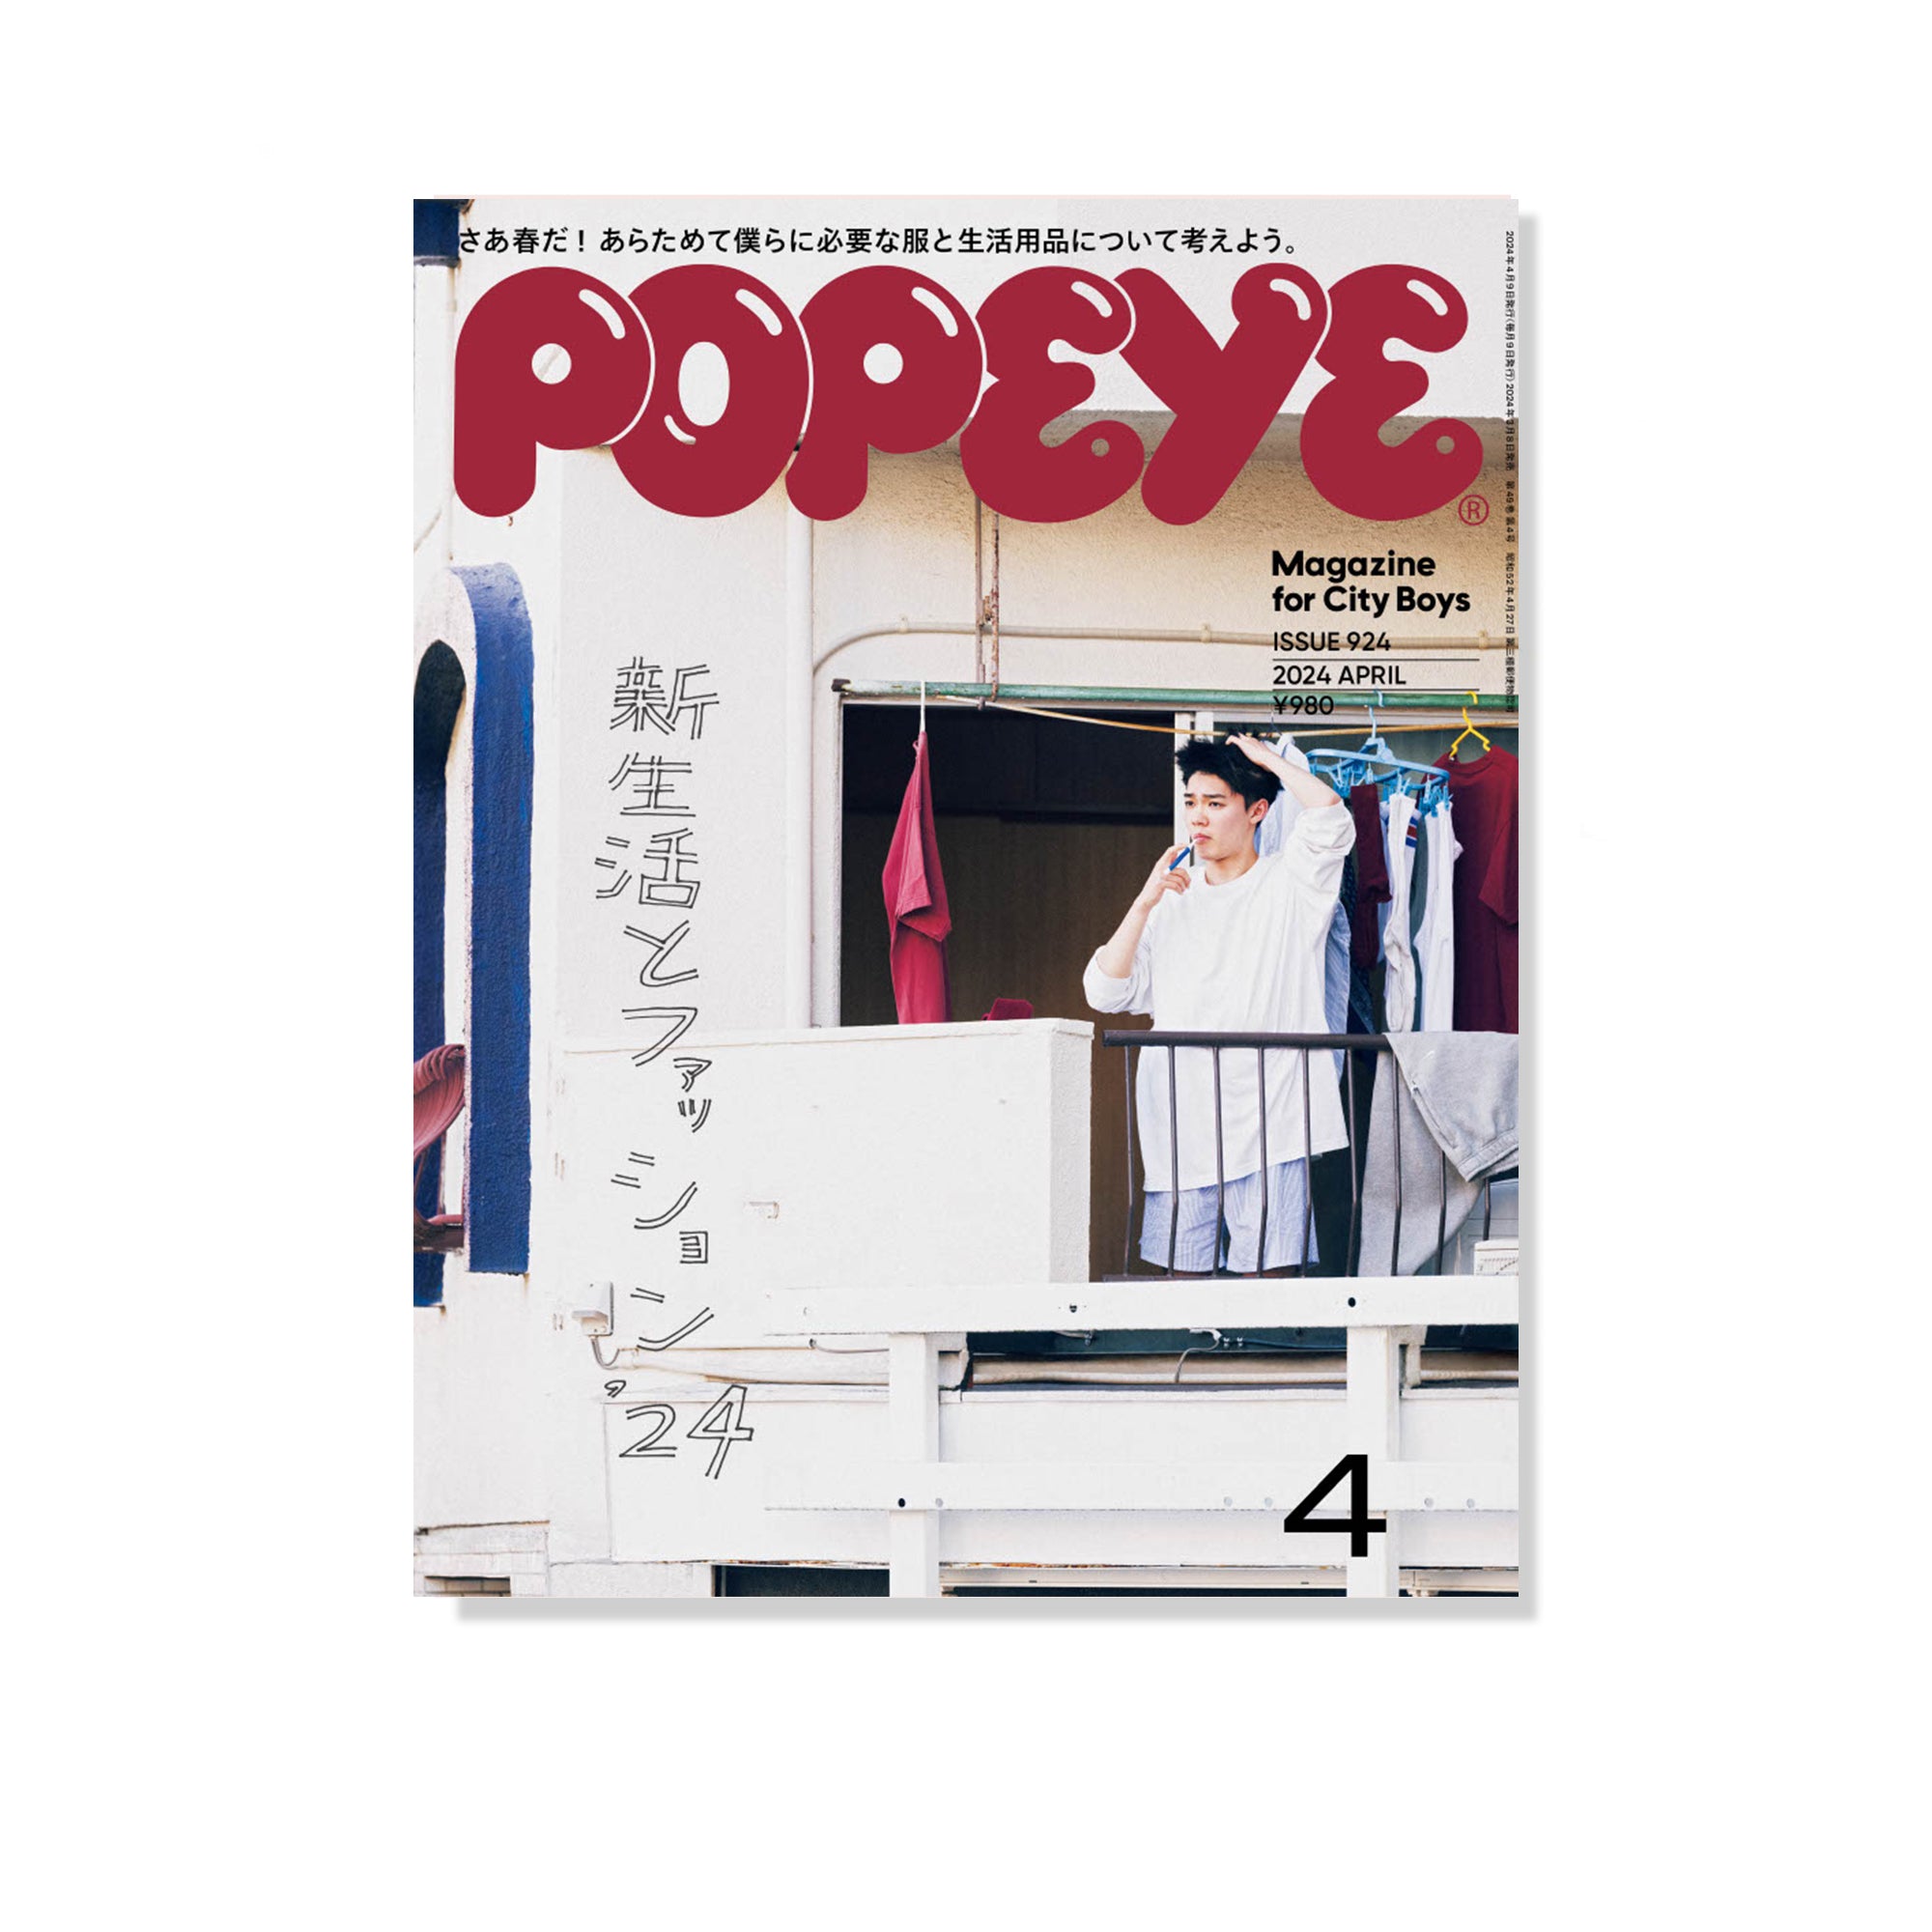 Popeye Issue 924 - April 2024